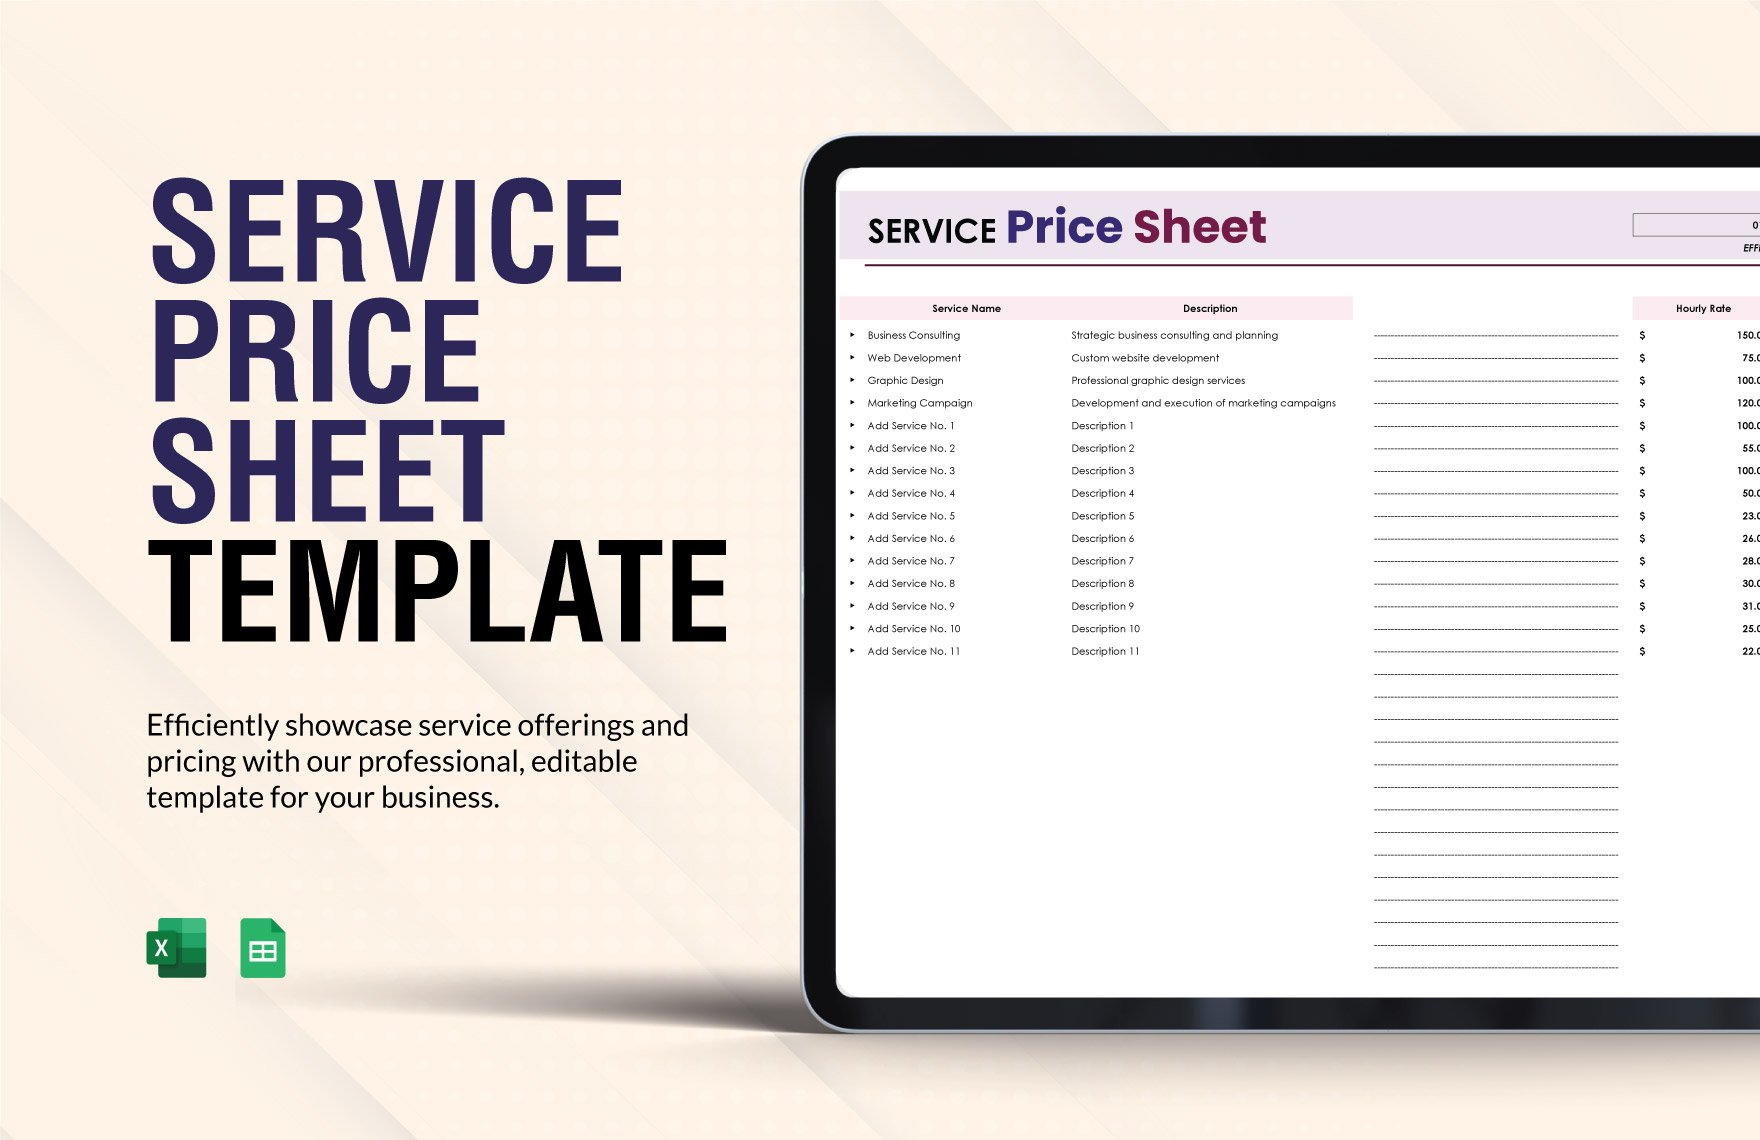 Service Price Sheet Template in Excel, Google Sheets